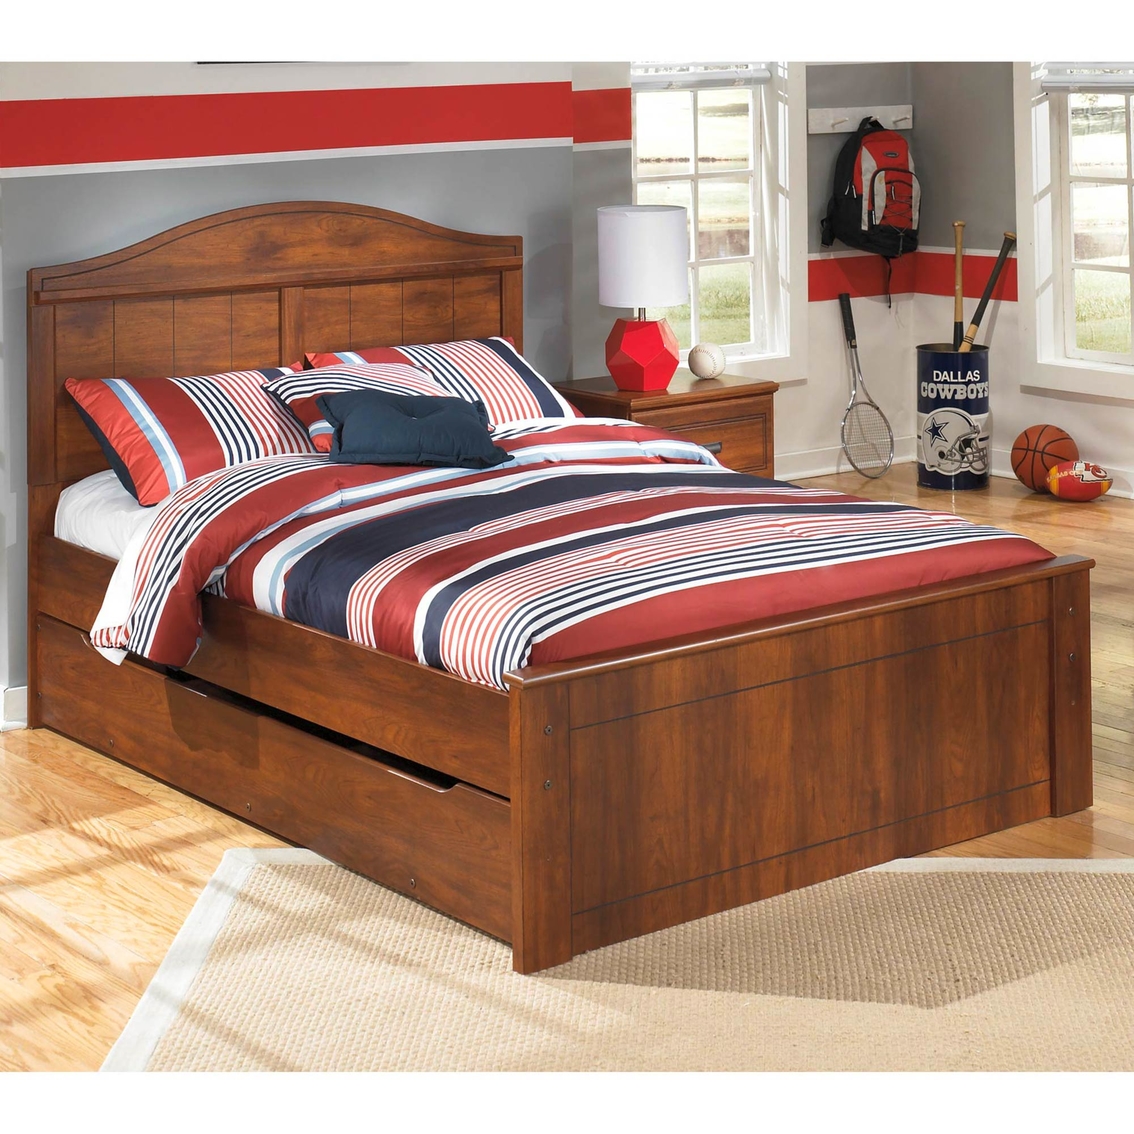 Ashley Barchan Trundle Bed - Image 2 of 4